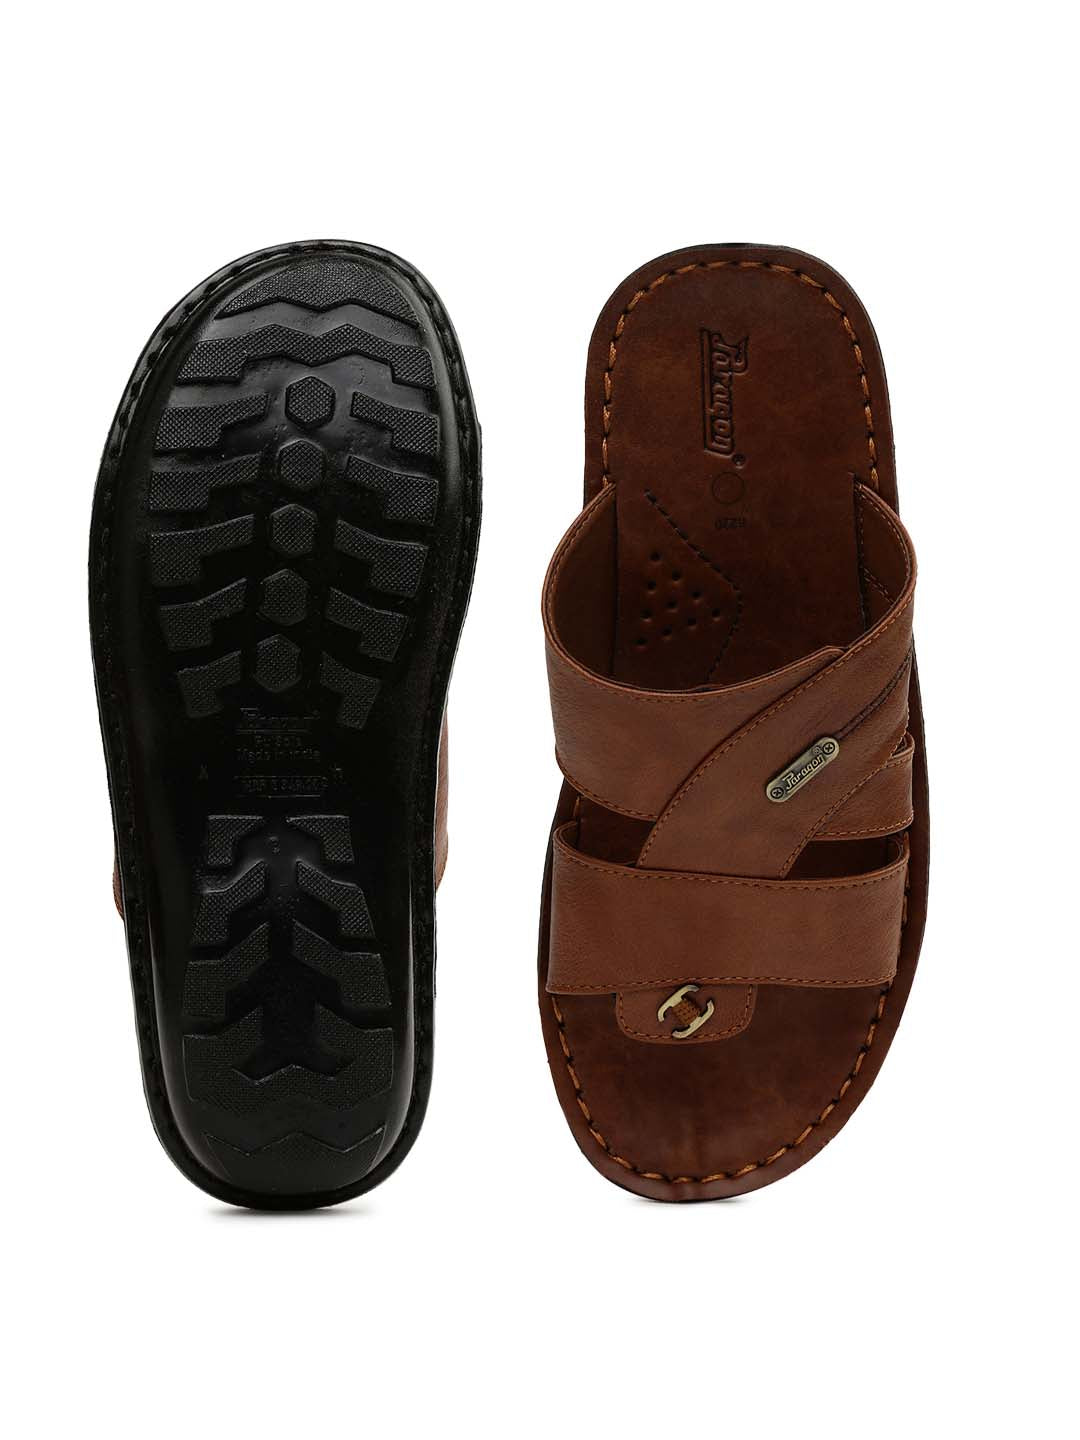 Paragon PU6220G Men Stylish Sandals | Comfortable Sandals for Daily Outdoor Use | Casual Formal Sandals with Cushioned Soles